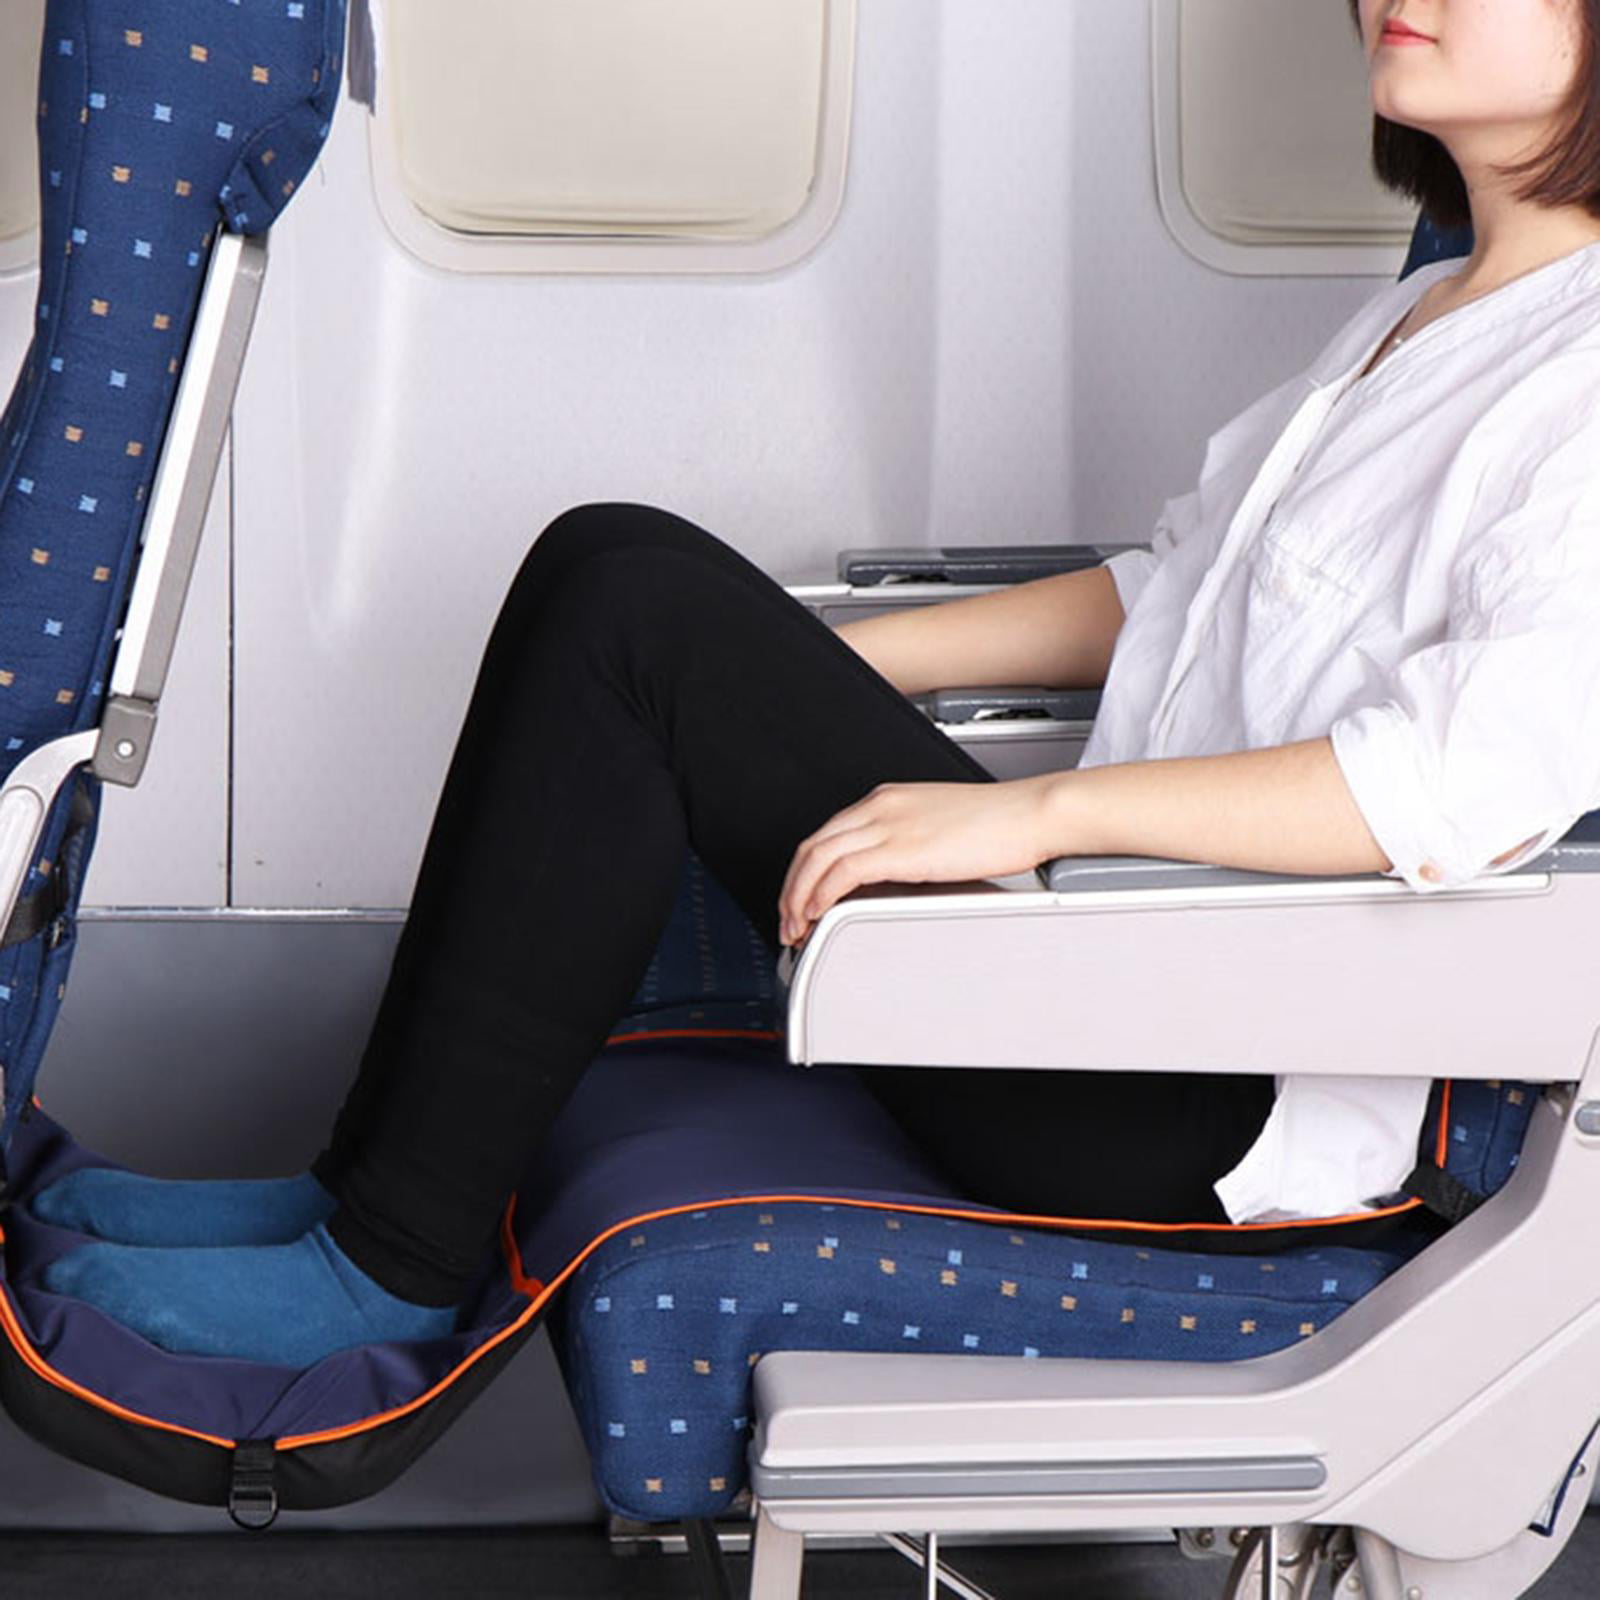 Alottery Foot Hammock,Travel Accessories for Airplane Train Bus Office  Home-Prevents Soreness and Swelling,Portable Adjustable Height Foot Rest